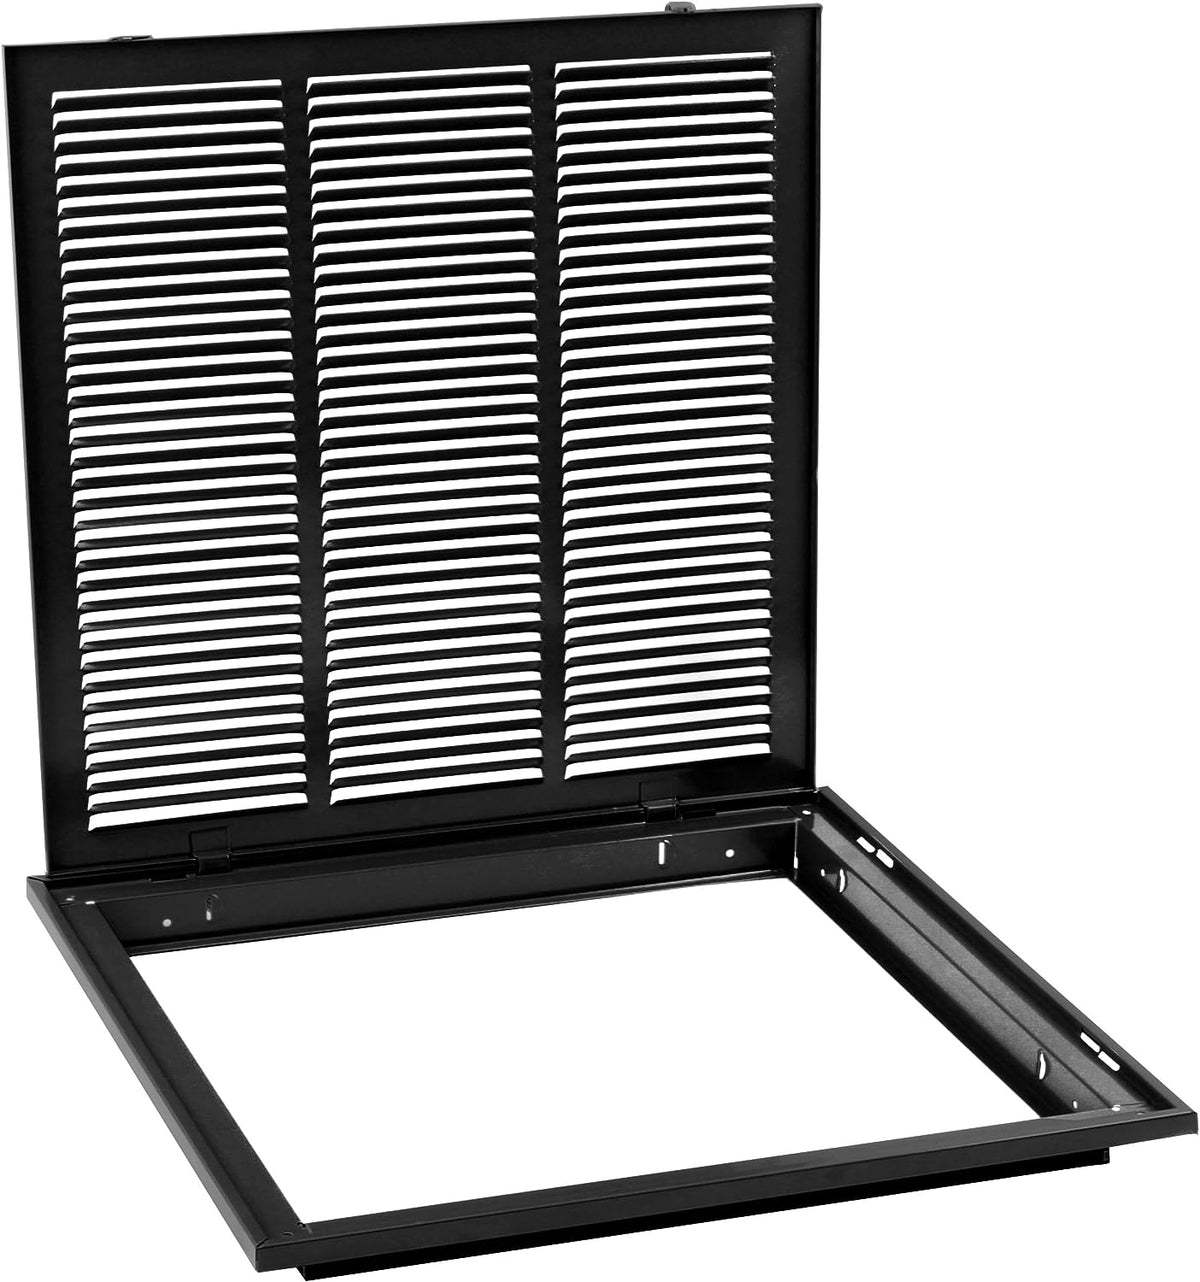 14&quot; X 24&quot; Steel Return Air Filter Grille for 1&quot; Filter - Removable Frame - Black - [Outer Dimensions: 16 5/8&quot; X 26 5/8&quot;]